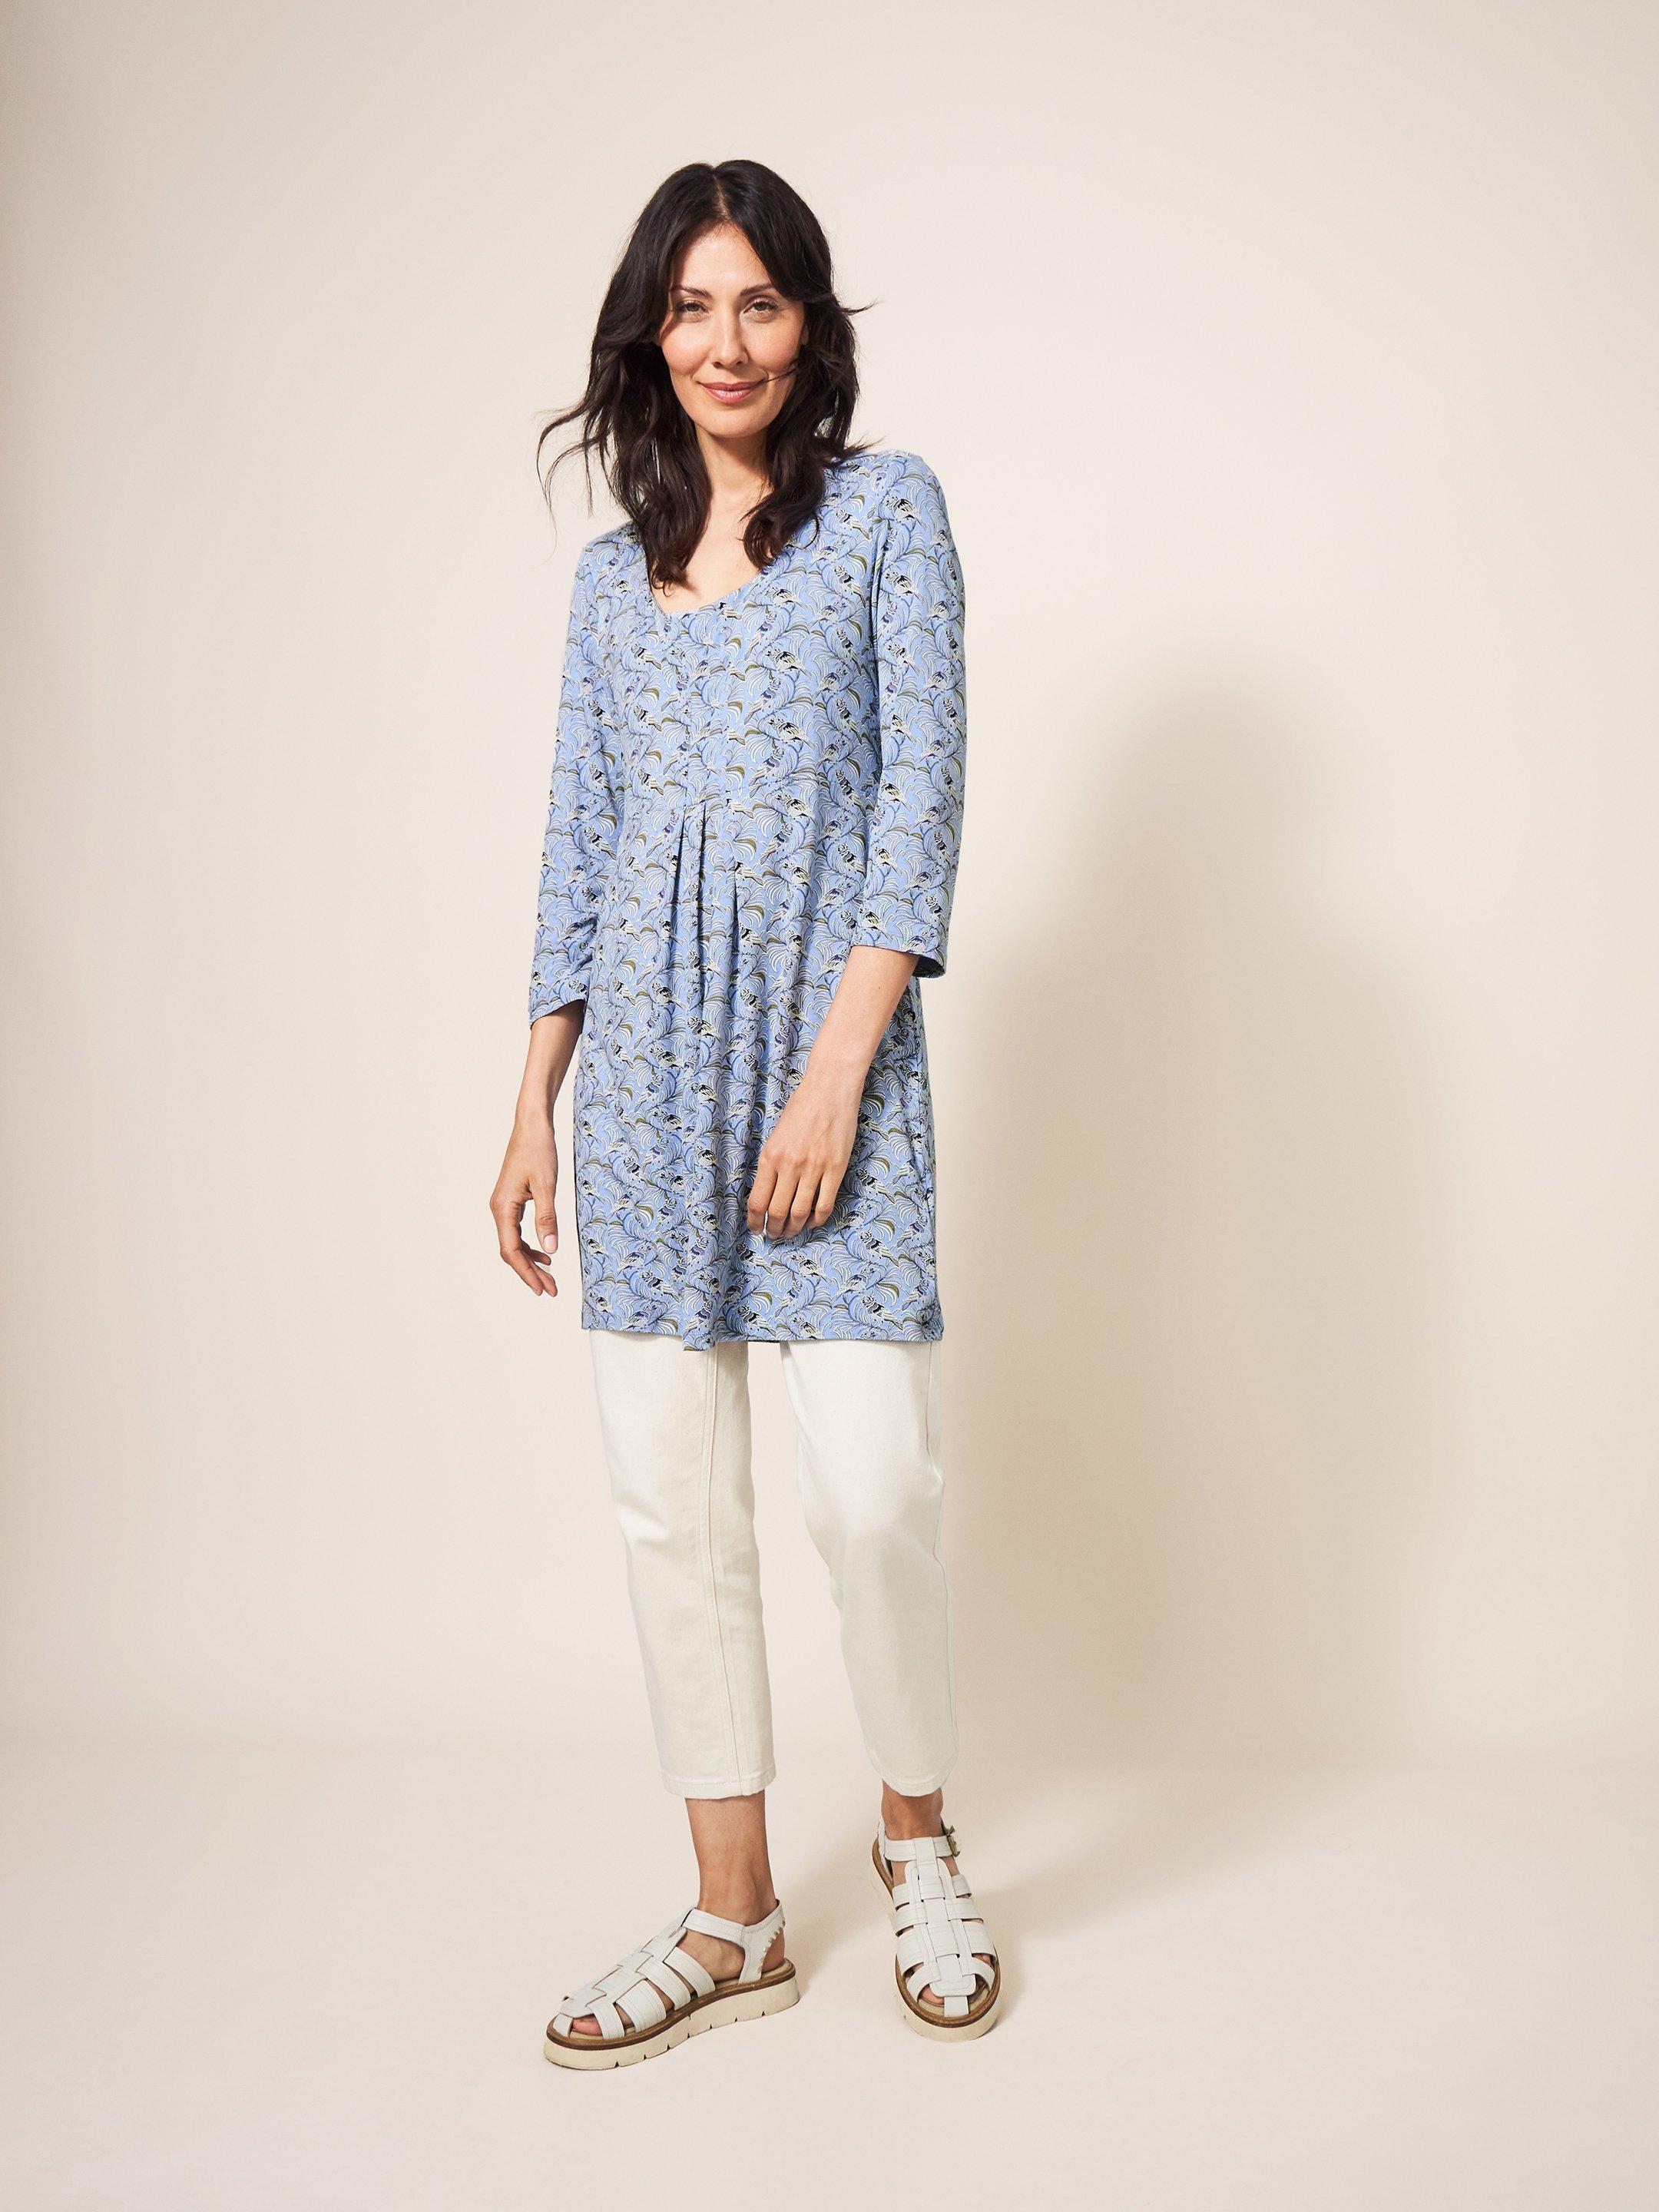 PIPPY LONG LINE TOP in BLUE PR - LIFESTYLE